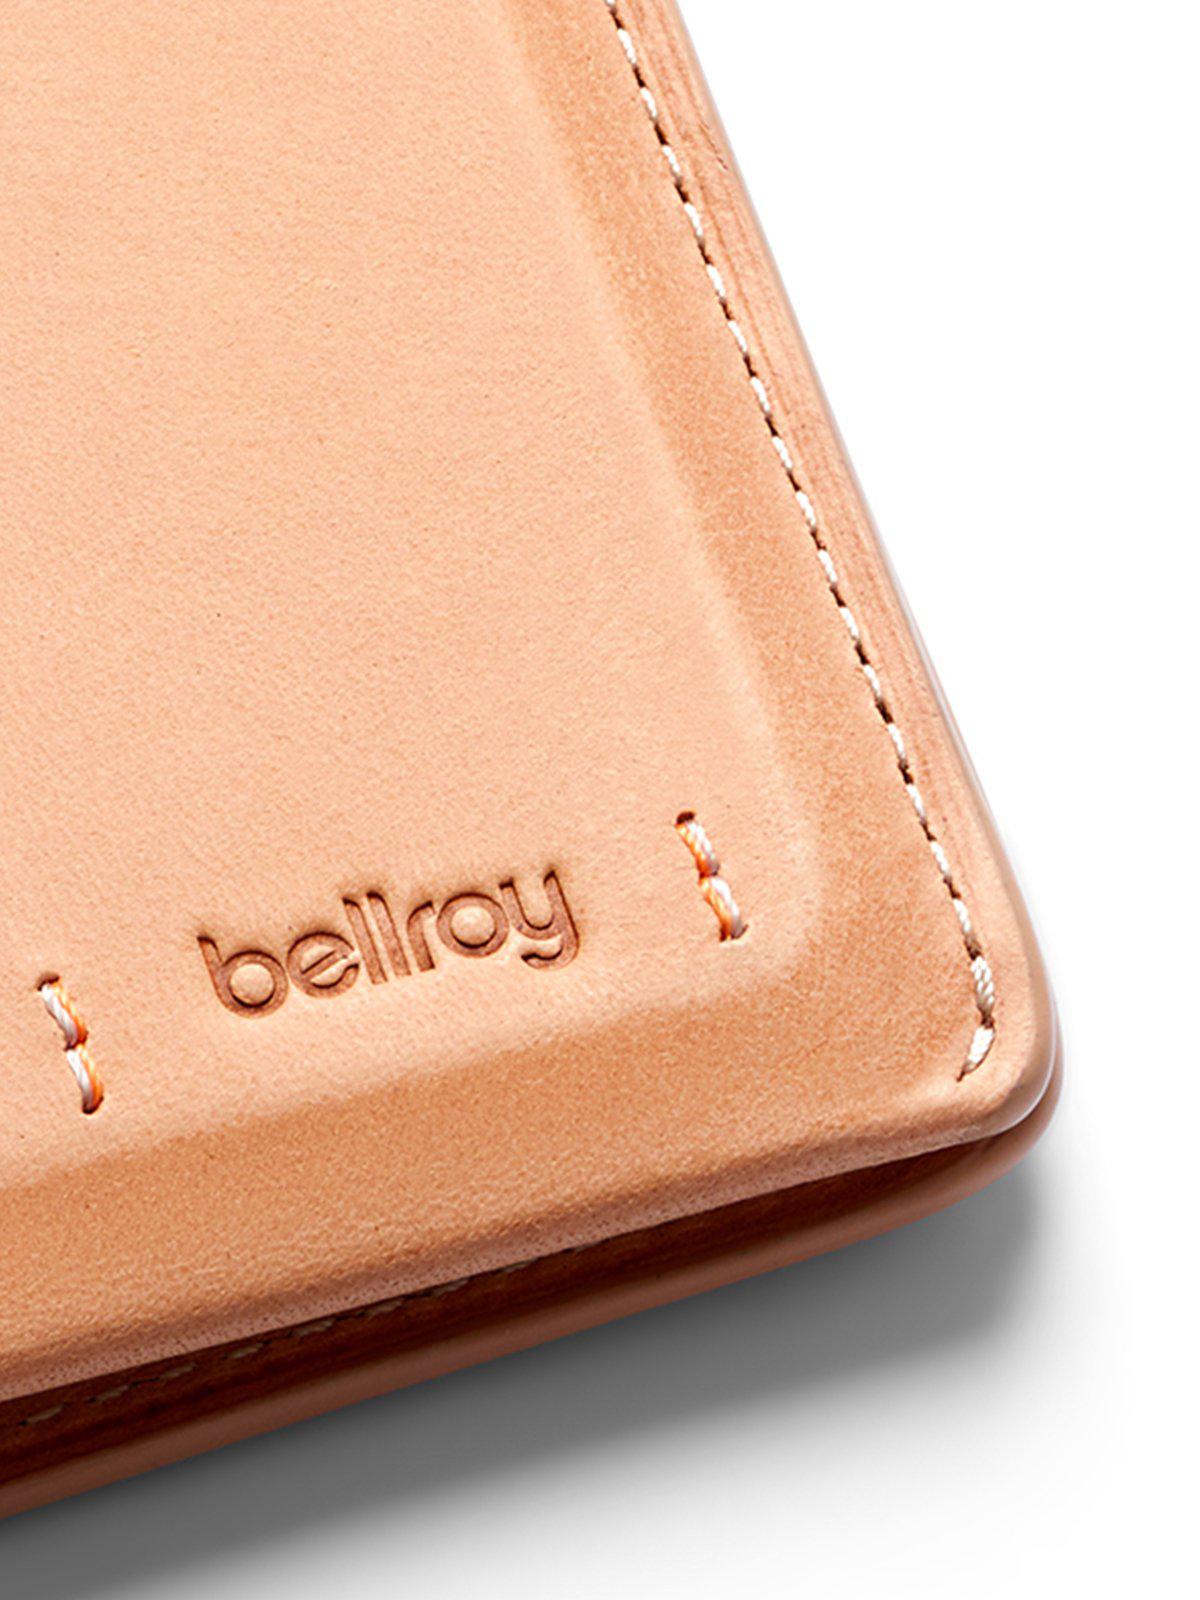 Bellroy Note Sleeve Wallet Premium Edition Natural RFID